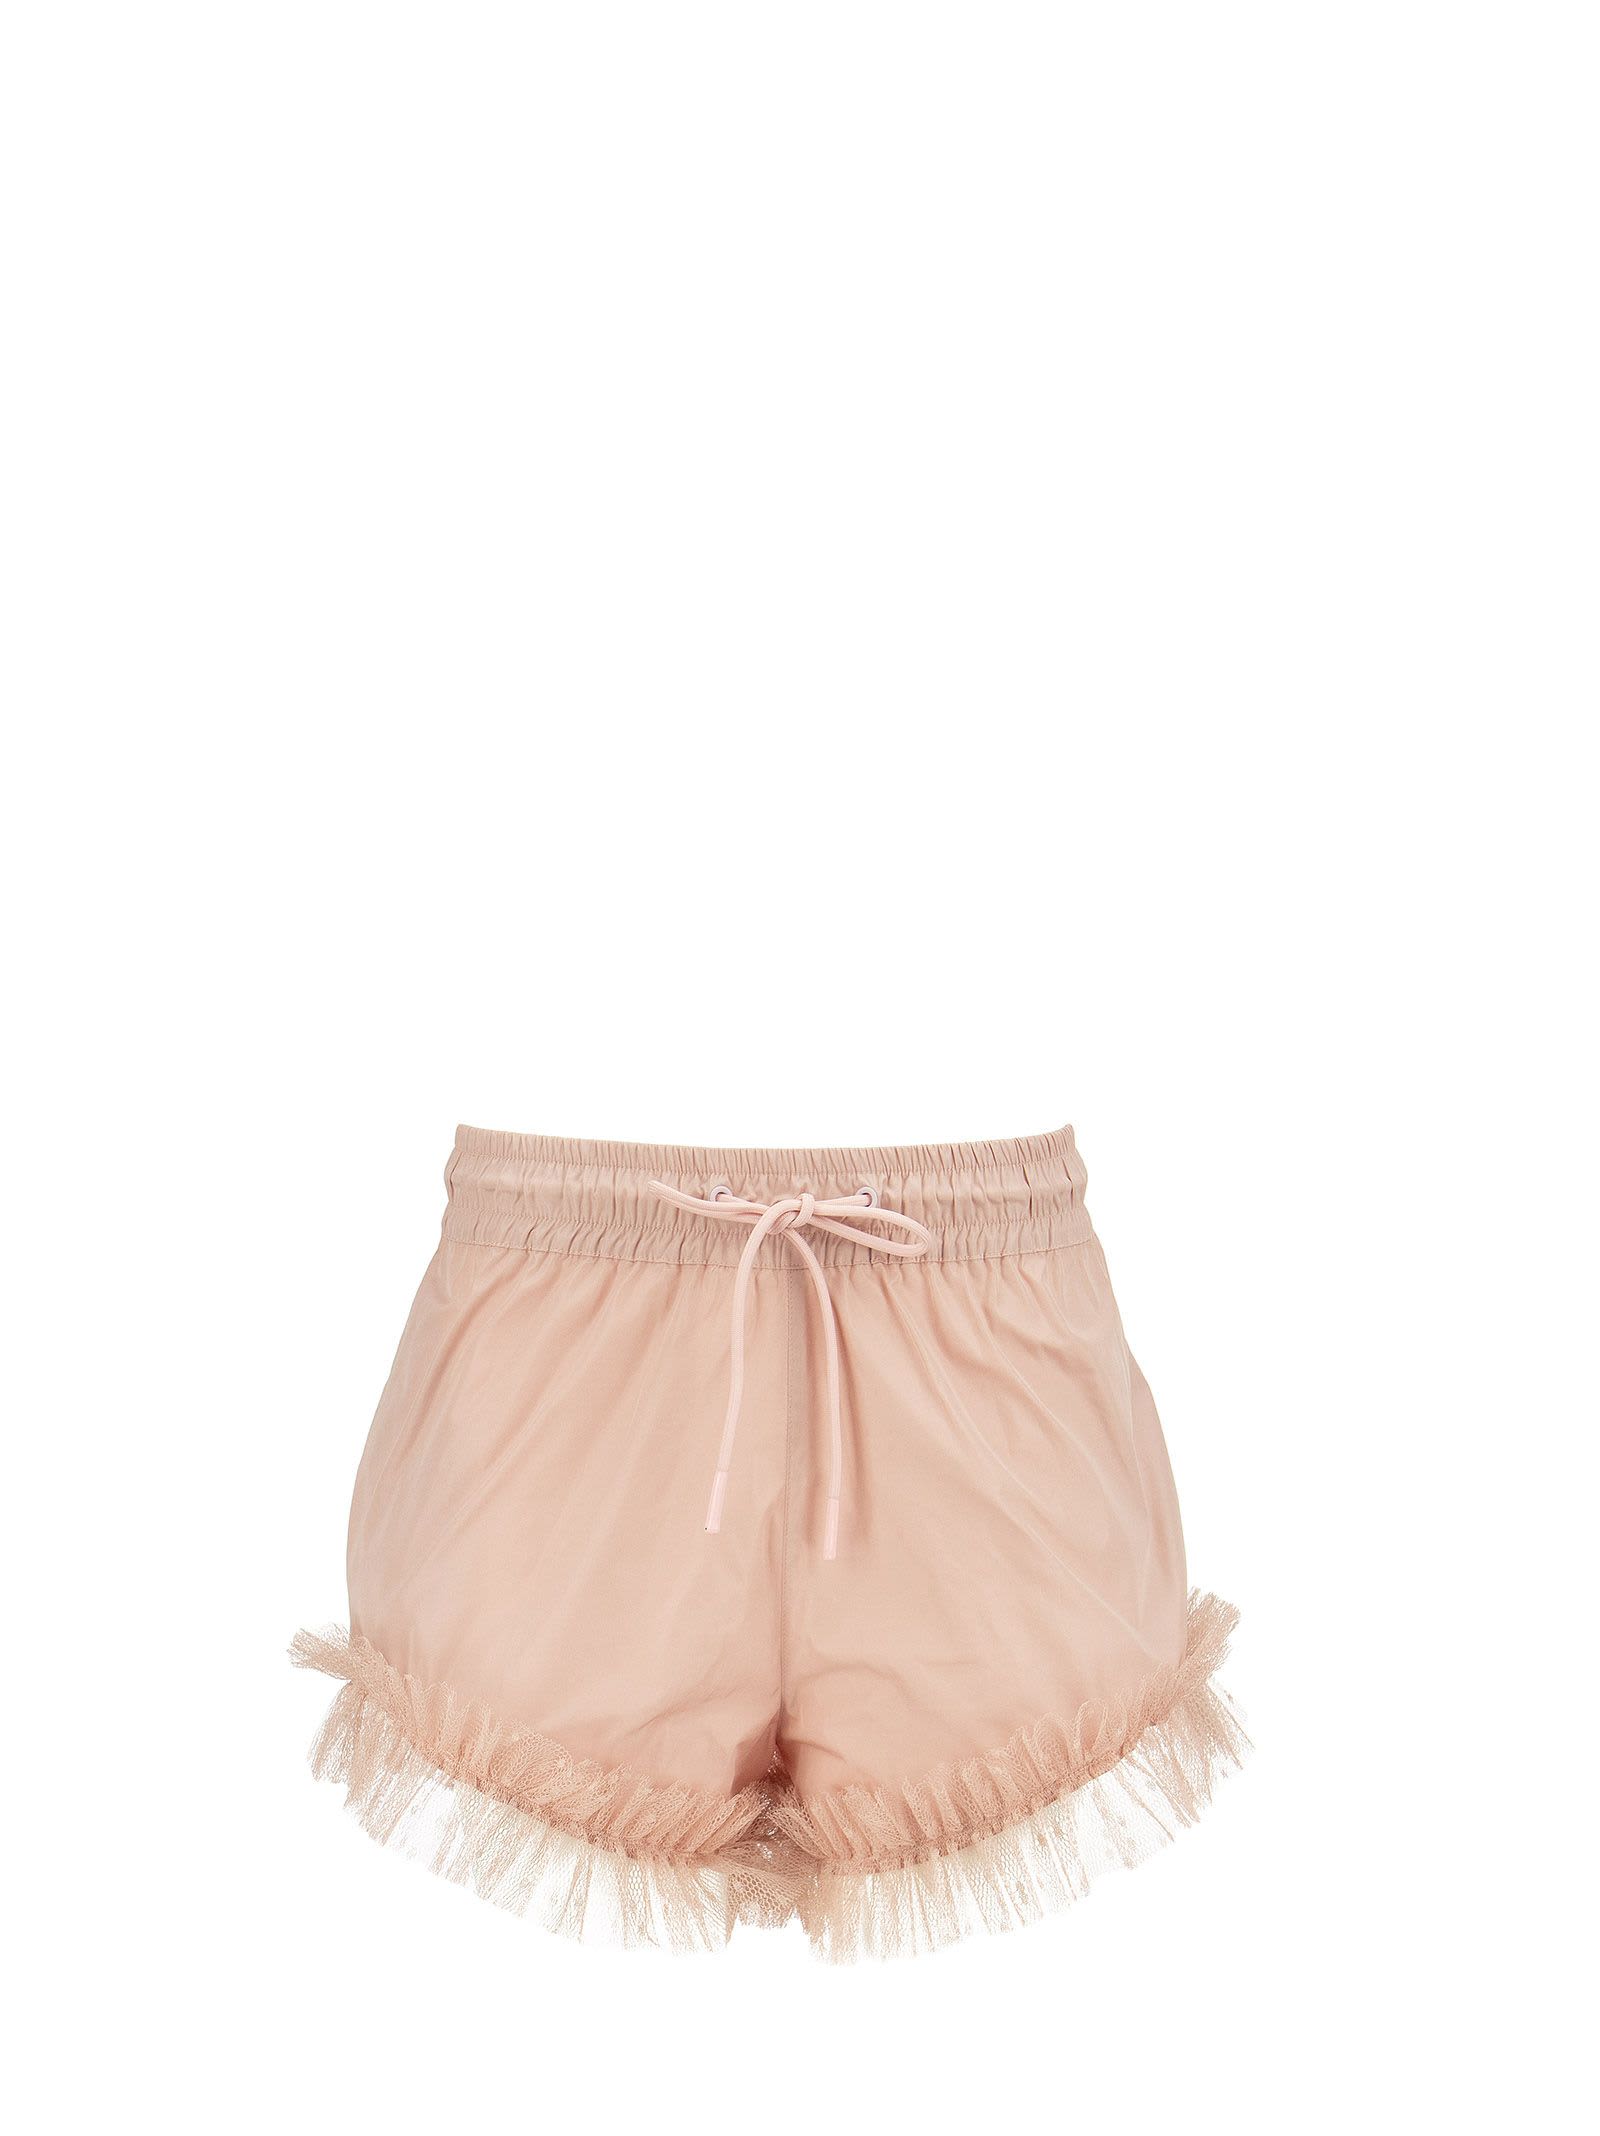 RED Valentino Taffeta And Point Desprit Tulle Shorts